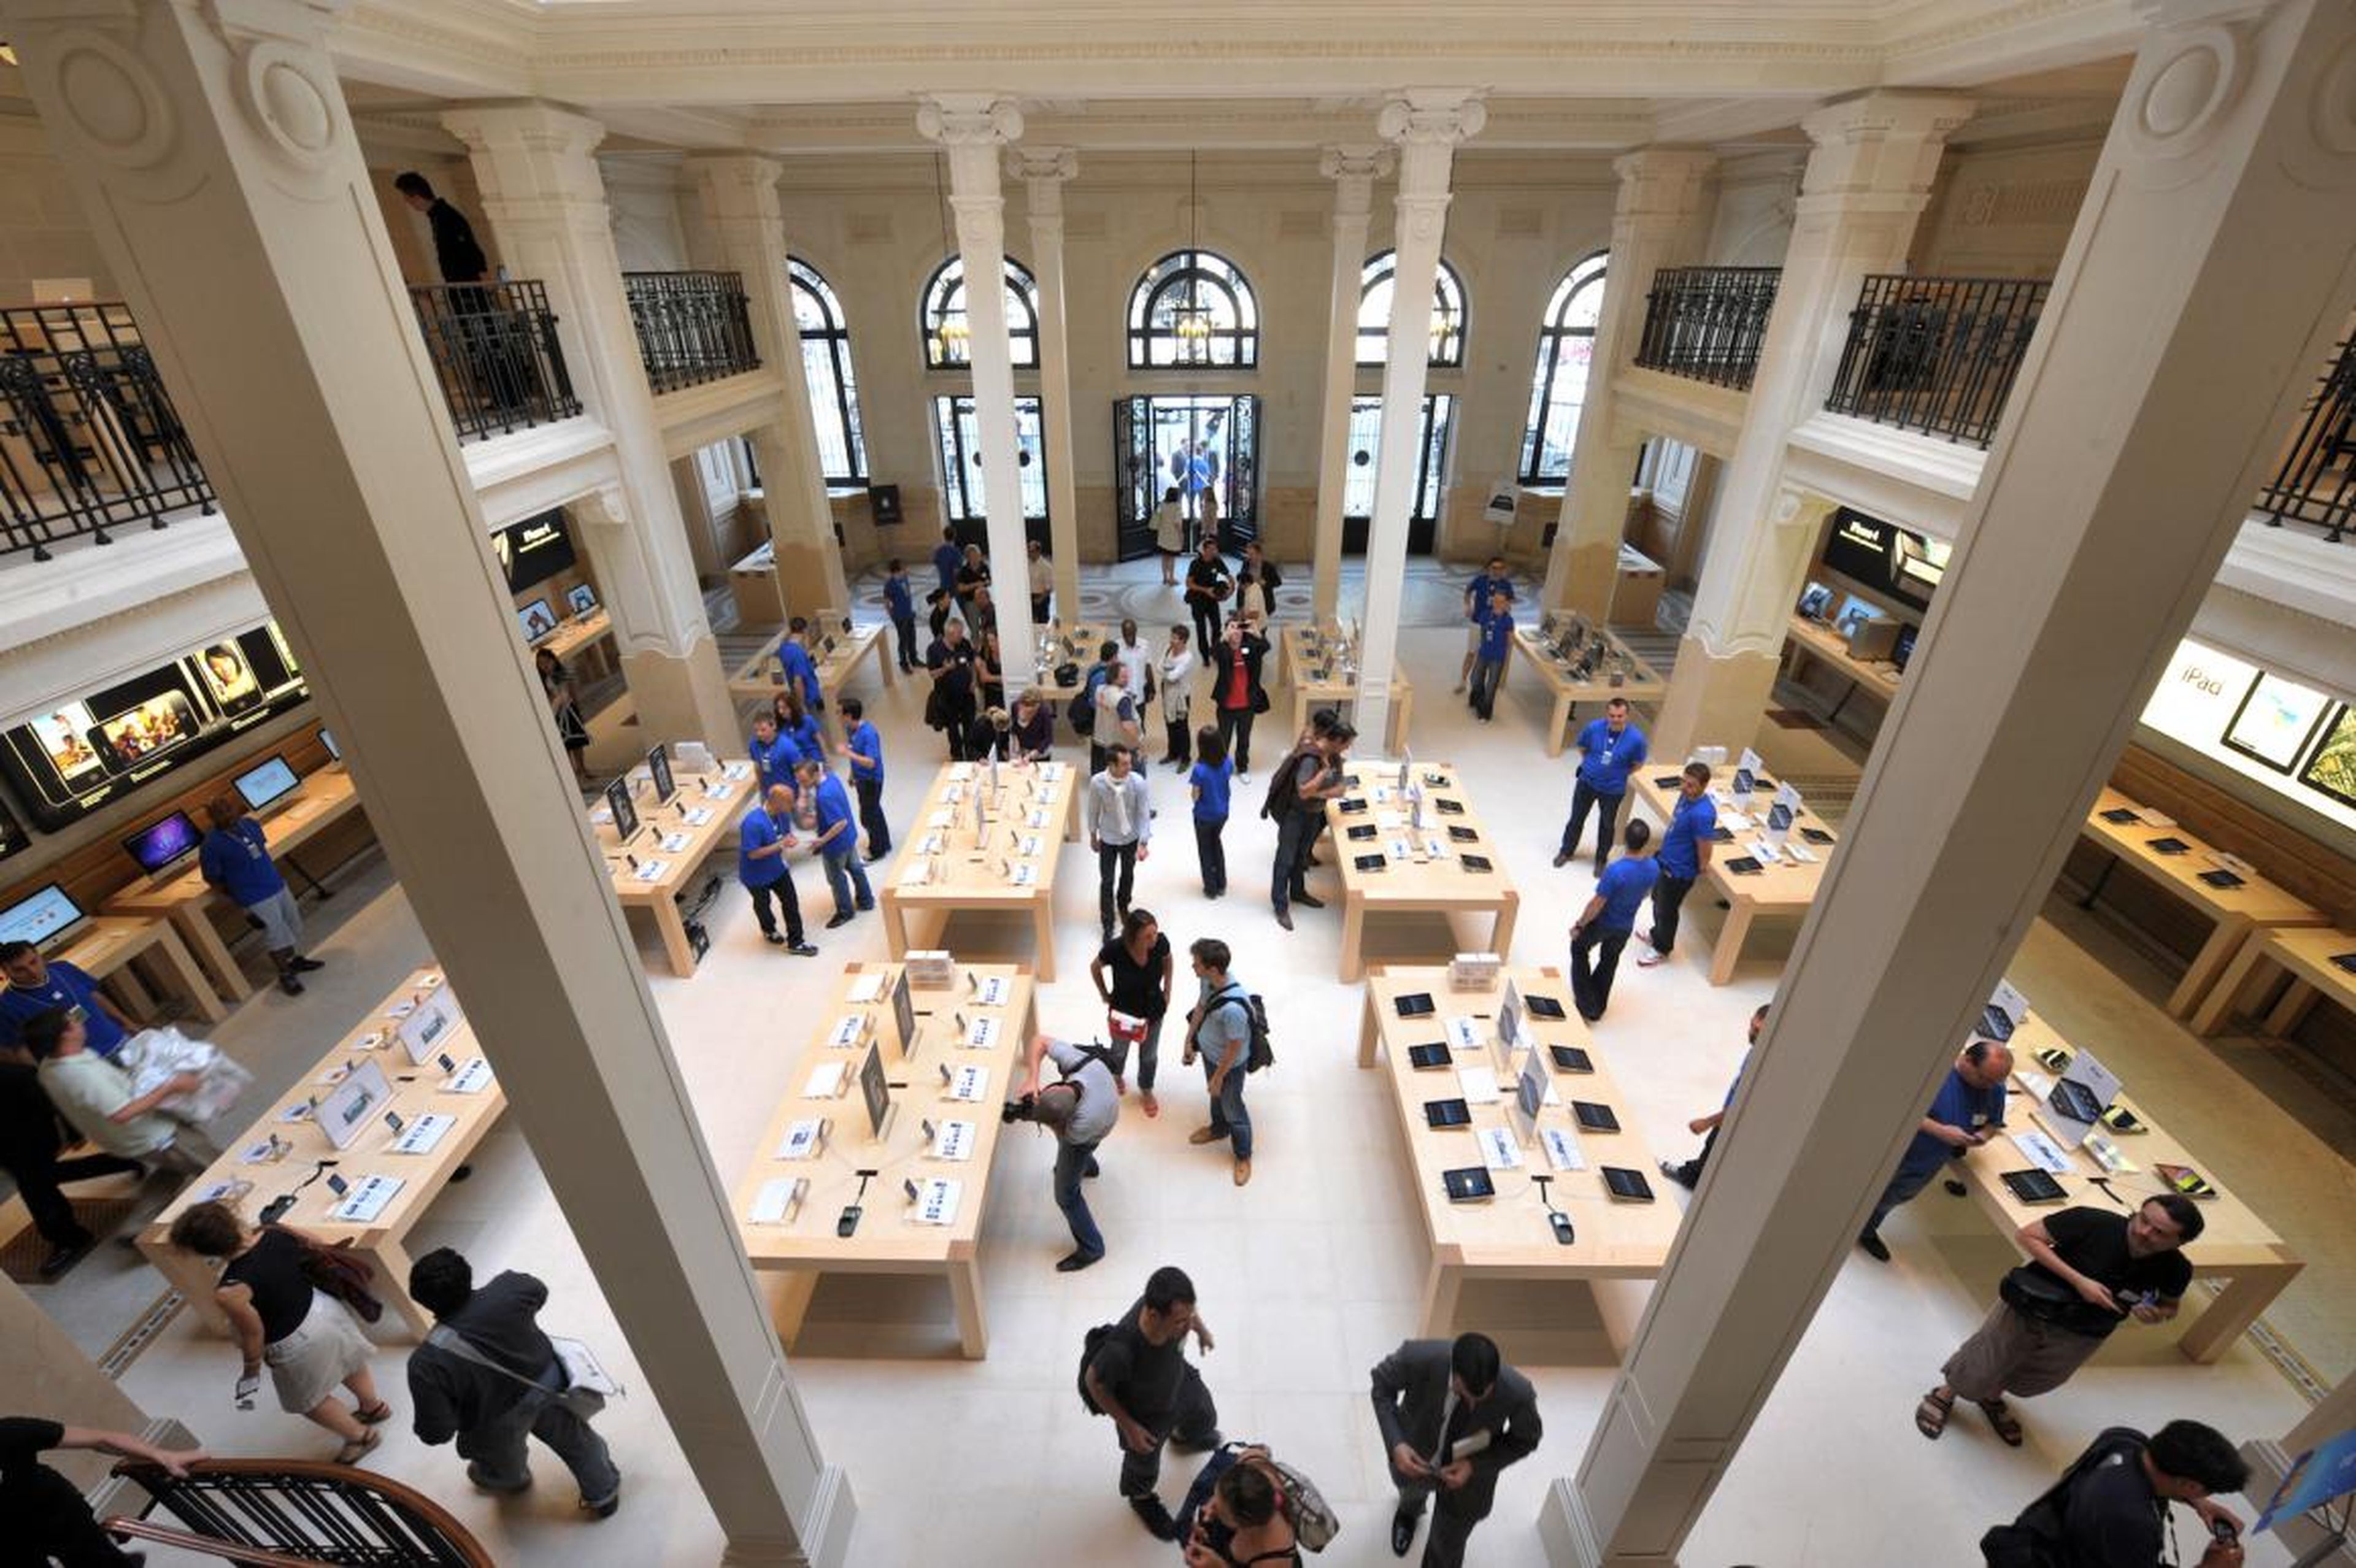 Inside, you will find a typical looking Apple store, but with a historic feel. White pillars stand strikingly tall, and black balcony railings cut through the space. Light shines down through a large-scale skylight.